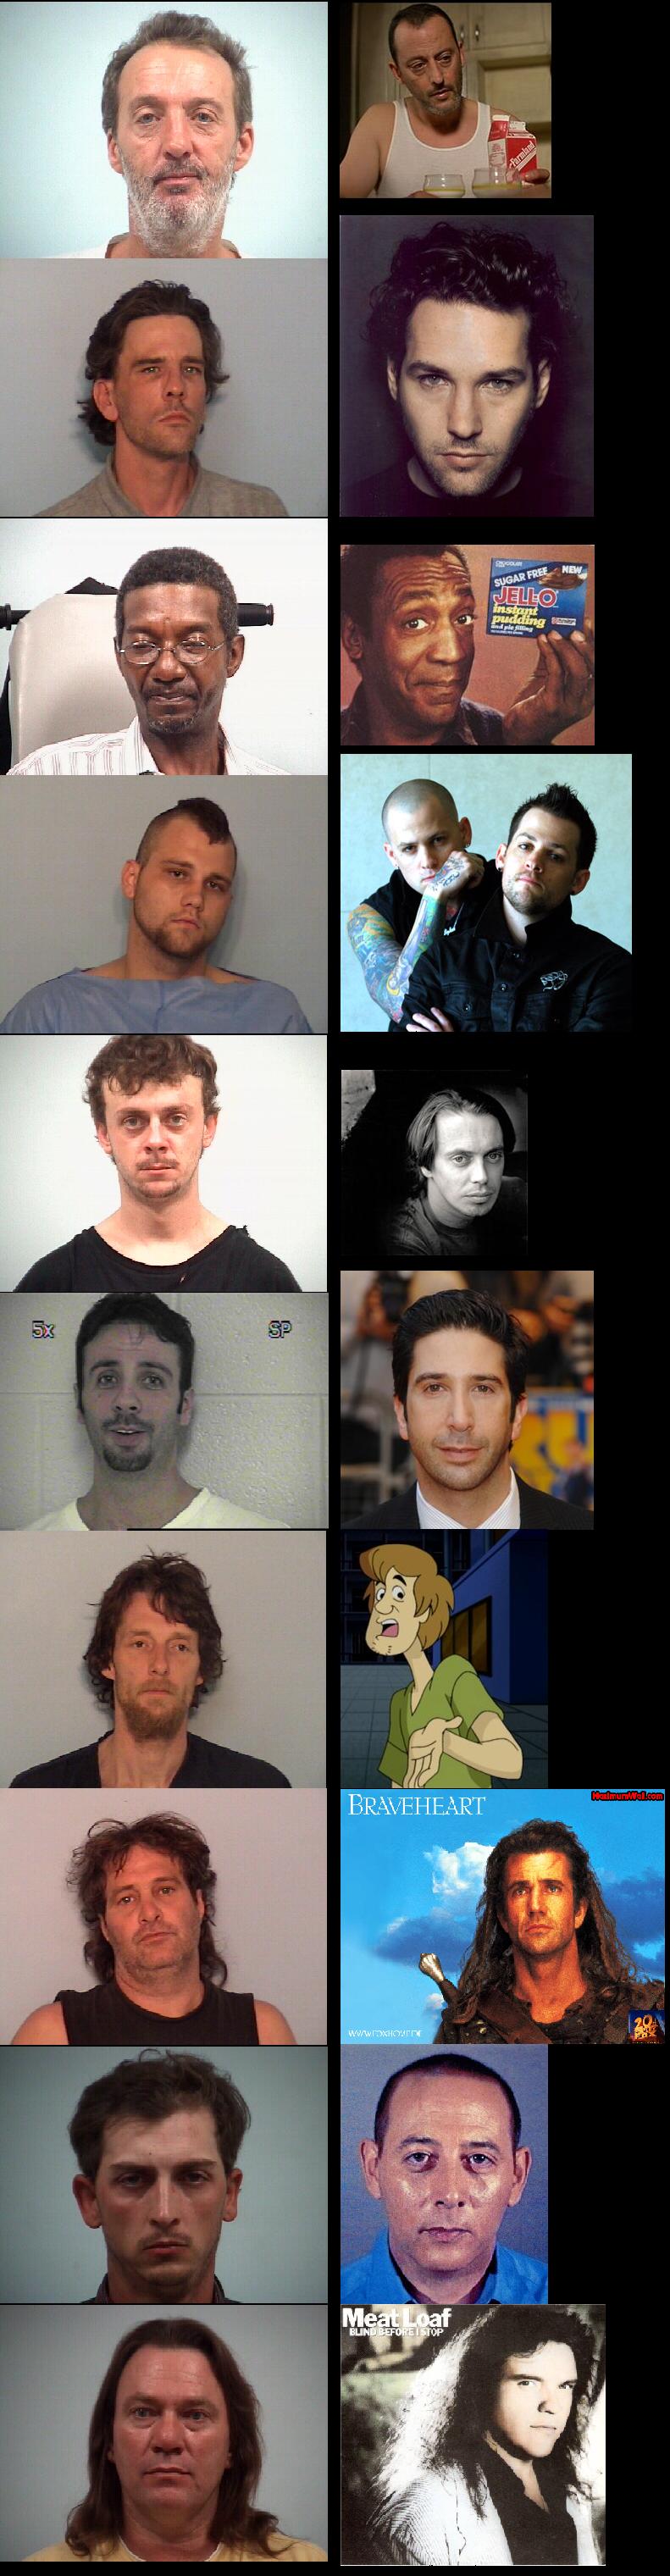 County's finest look-alikes!